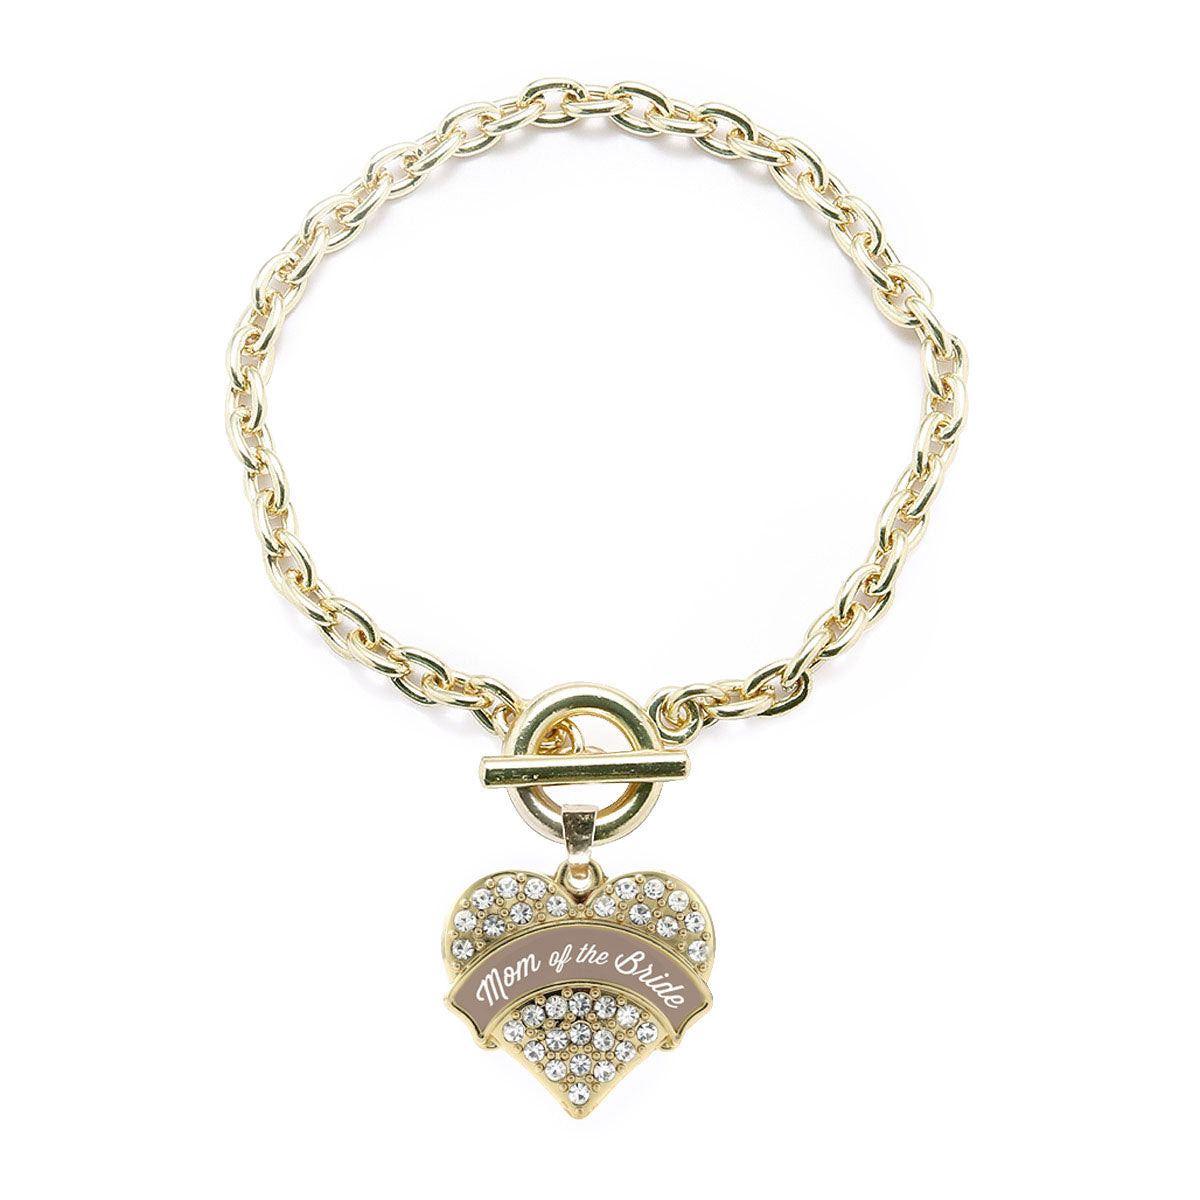 Gold Brown and White Mom of the Bride Pave Heart Charm Toggle Bracelet